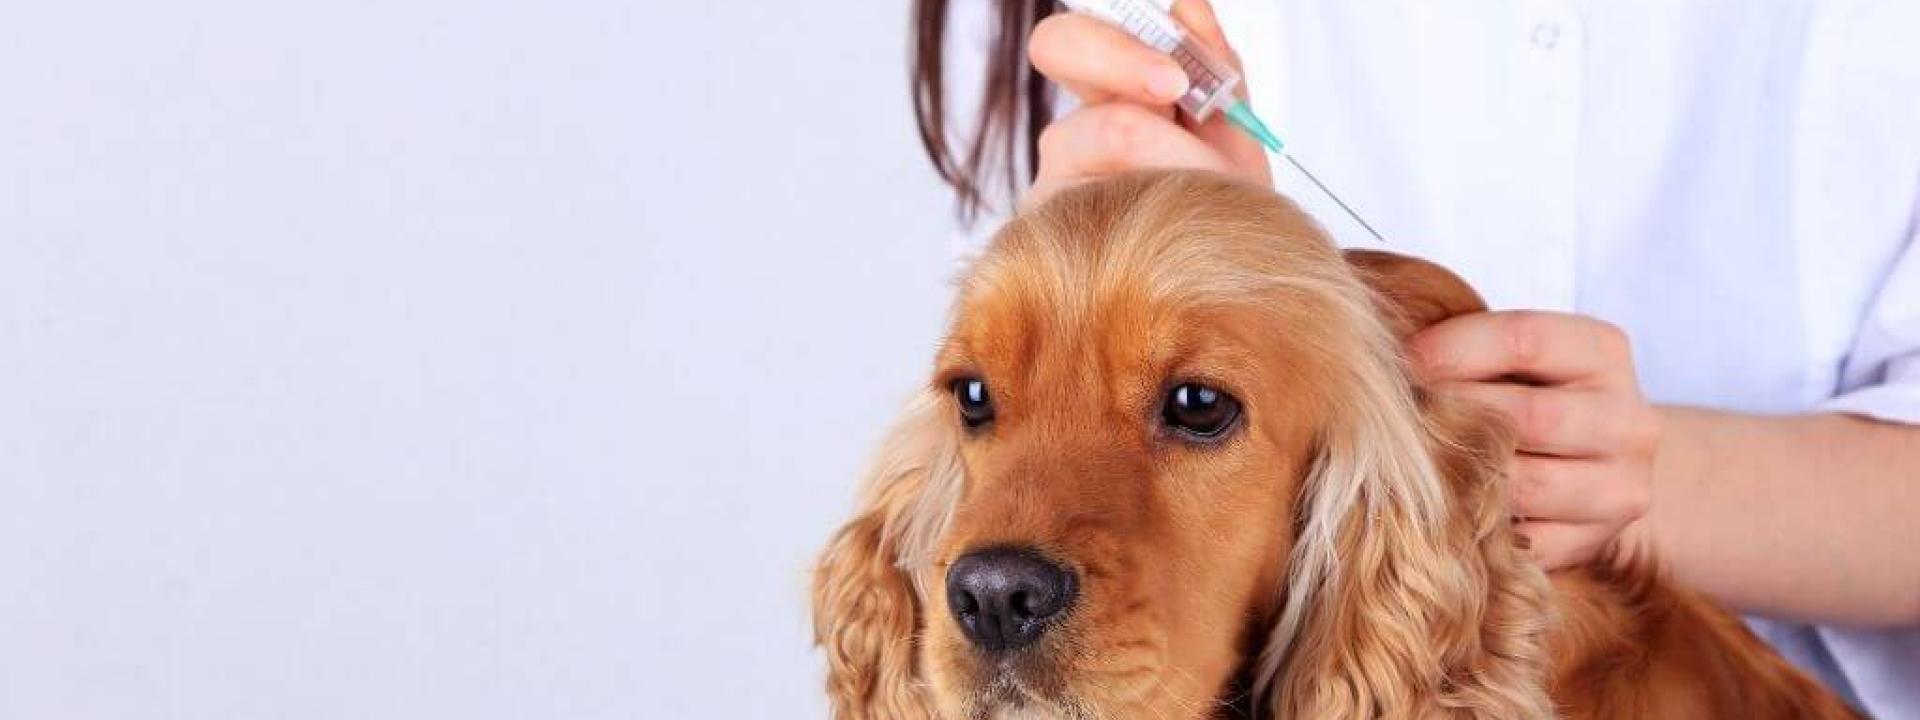 dog-vaccination-guide.jpg